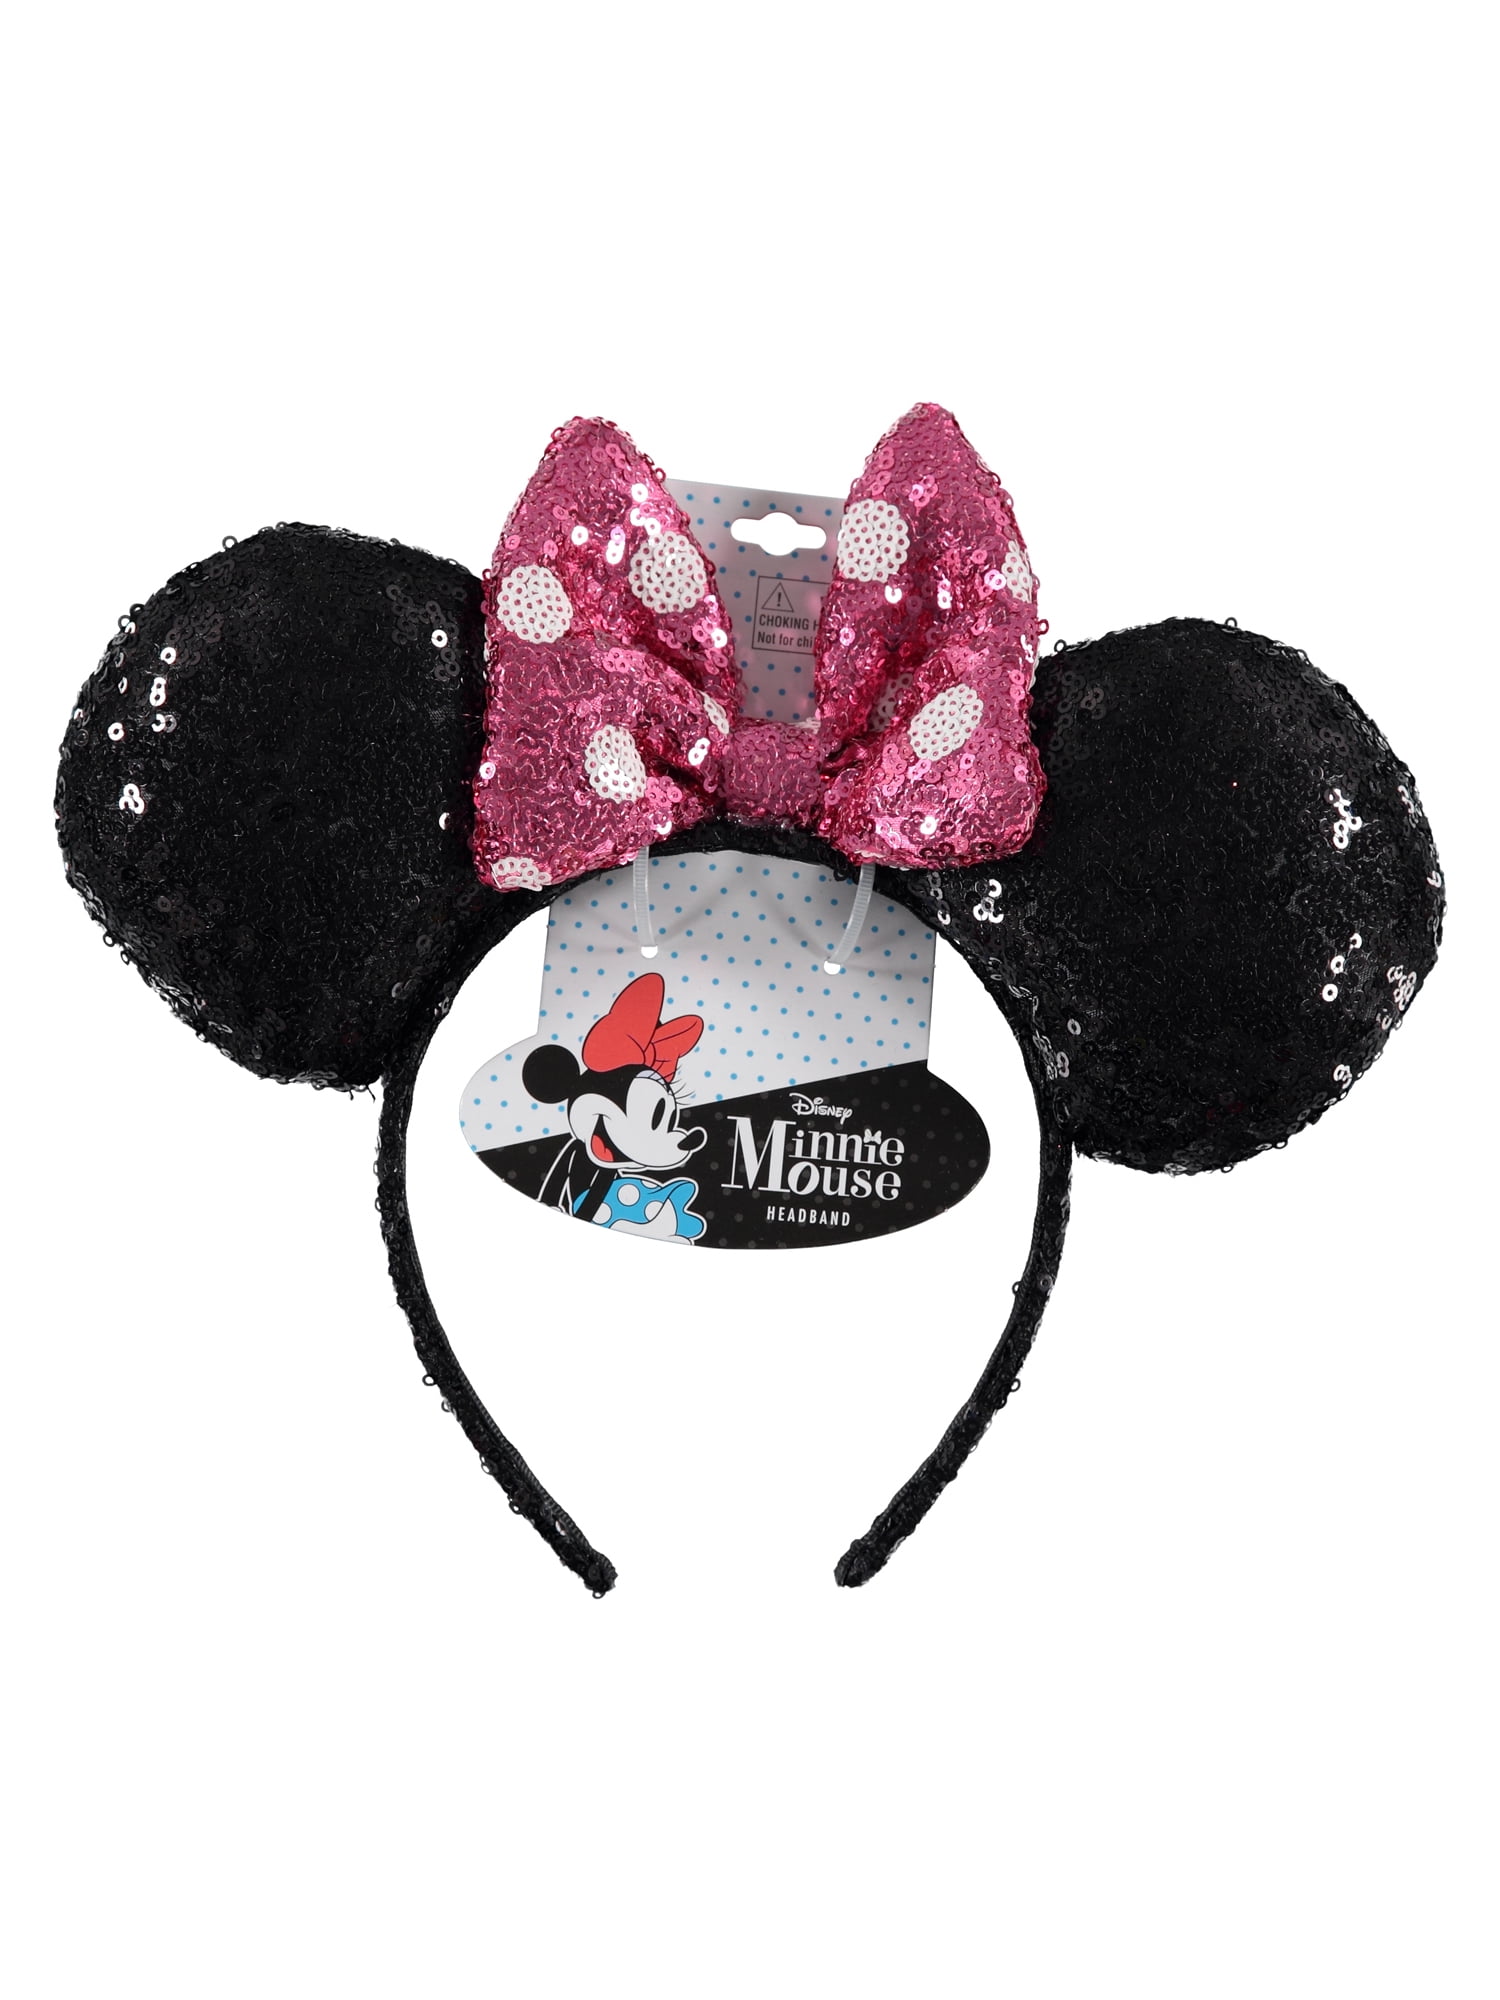 Black mini mouse ears with red spotted bow Fancy Dress Costume Accessory 